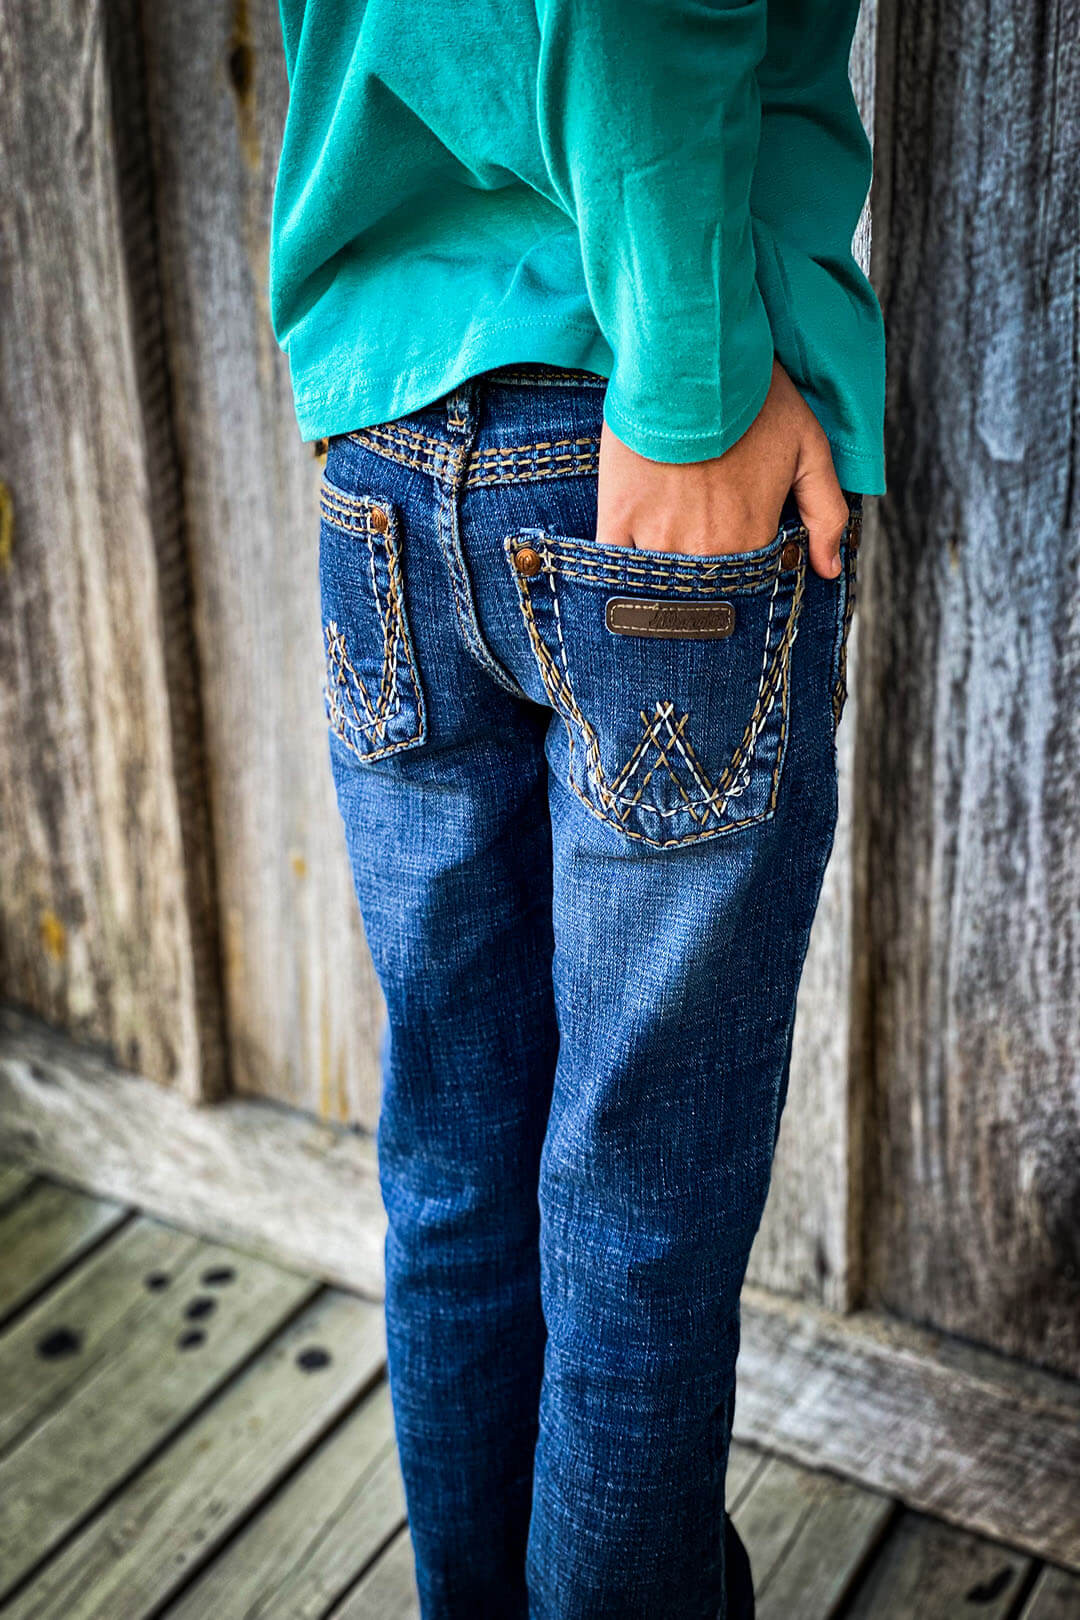 Back view of the wrangler girls retro jeans.  These are a darker wash jean,.